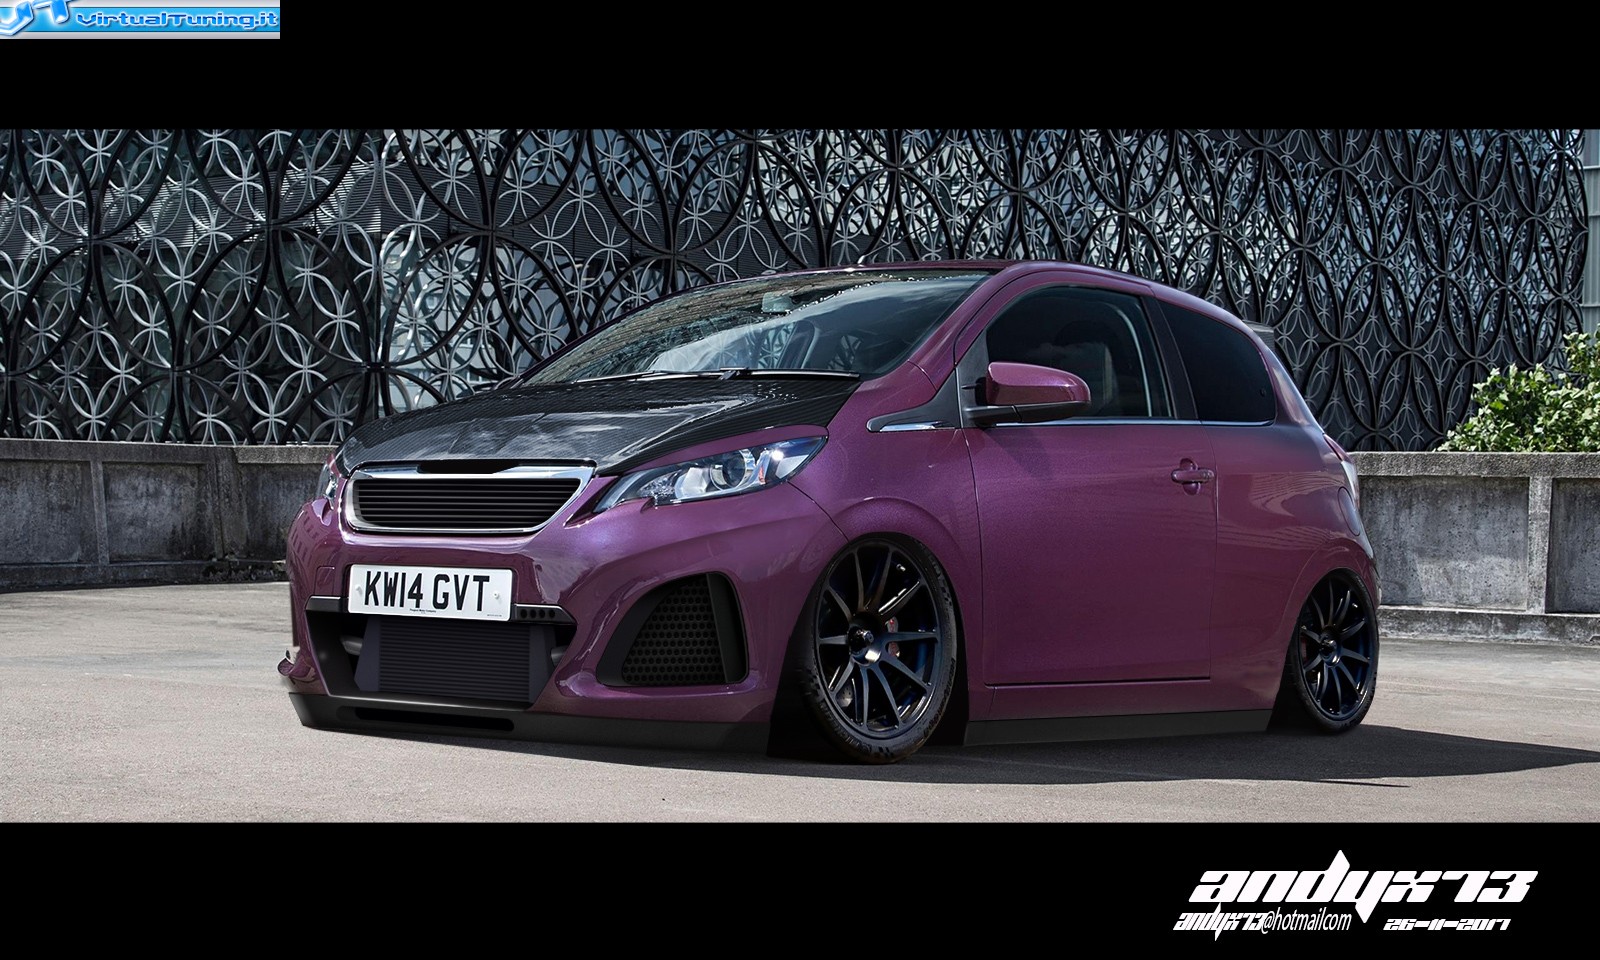 VirtualTuning PEUGEOT 108 by 